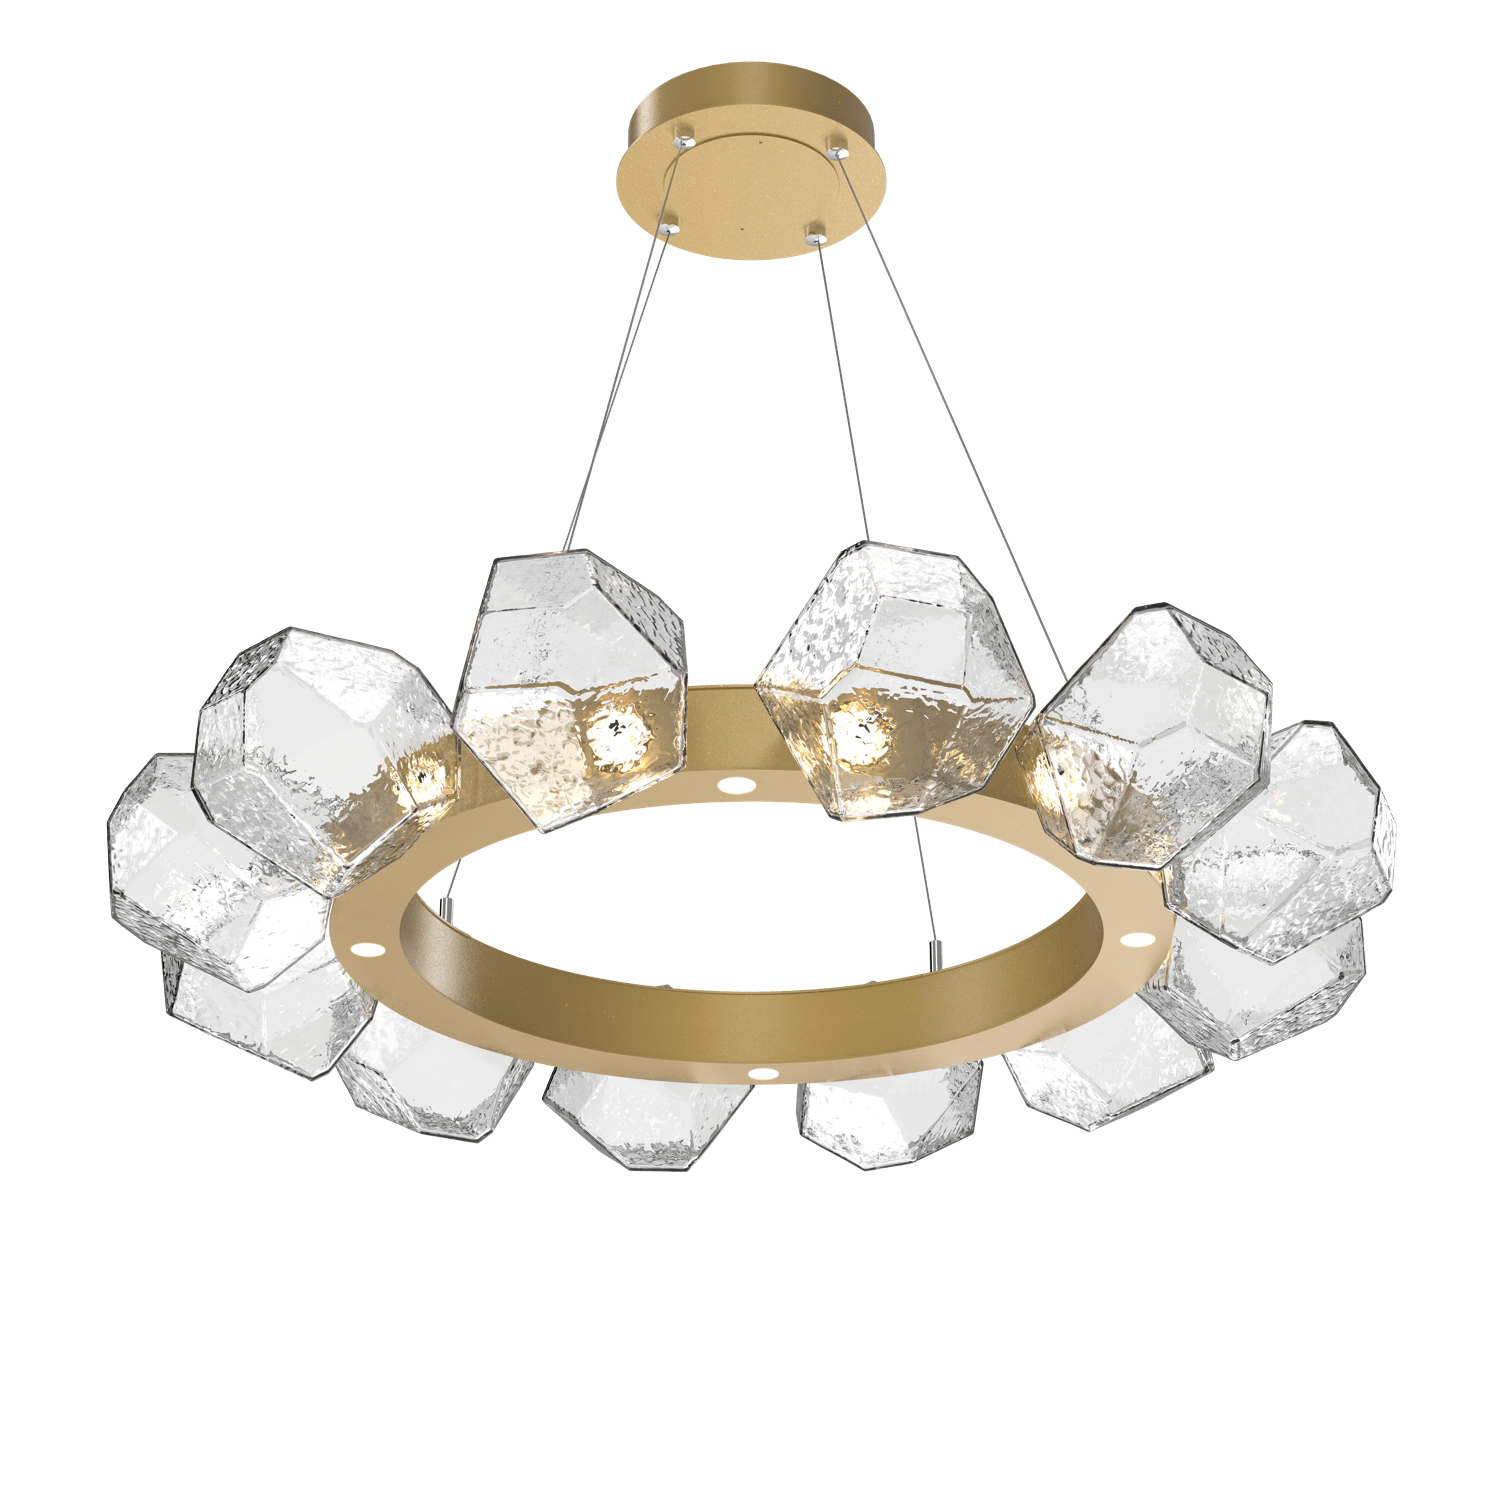 CHB0039-36-GB-C-Hammerton-Studio-Gem-36-inch-radial-ring-chandelier-with-gilded-brass-finish-and-clear-blown-glass-shades-and-LED-lamping